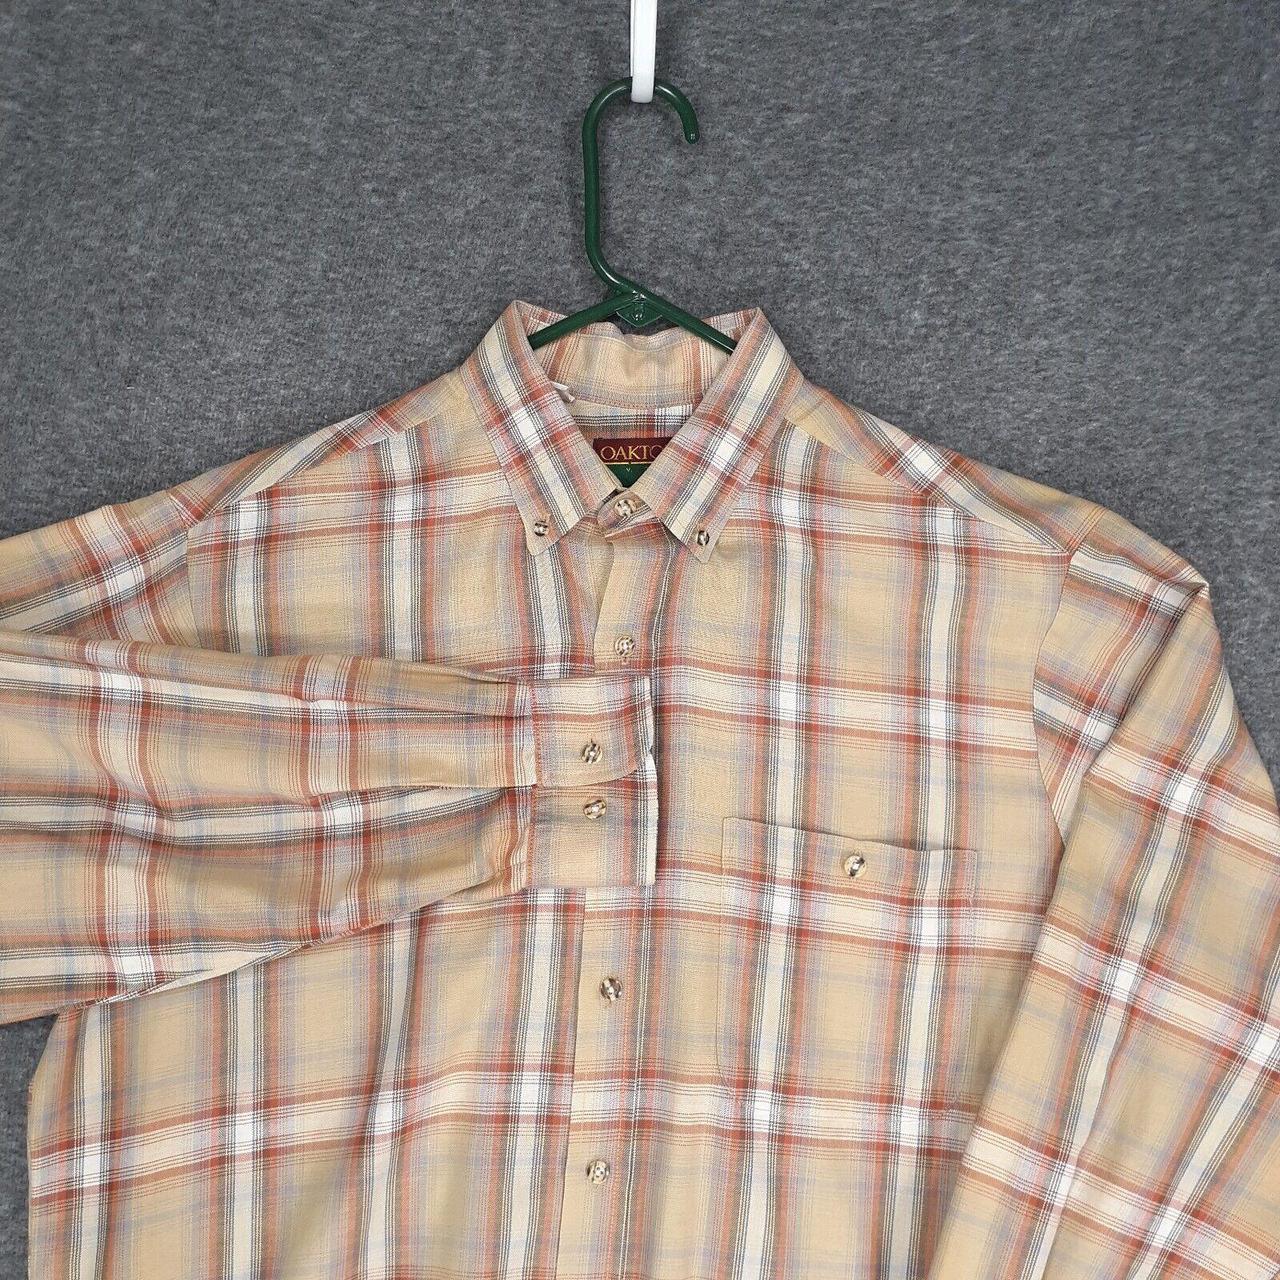 Product Image 2 - Oakton Limited button up shirt